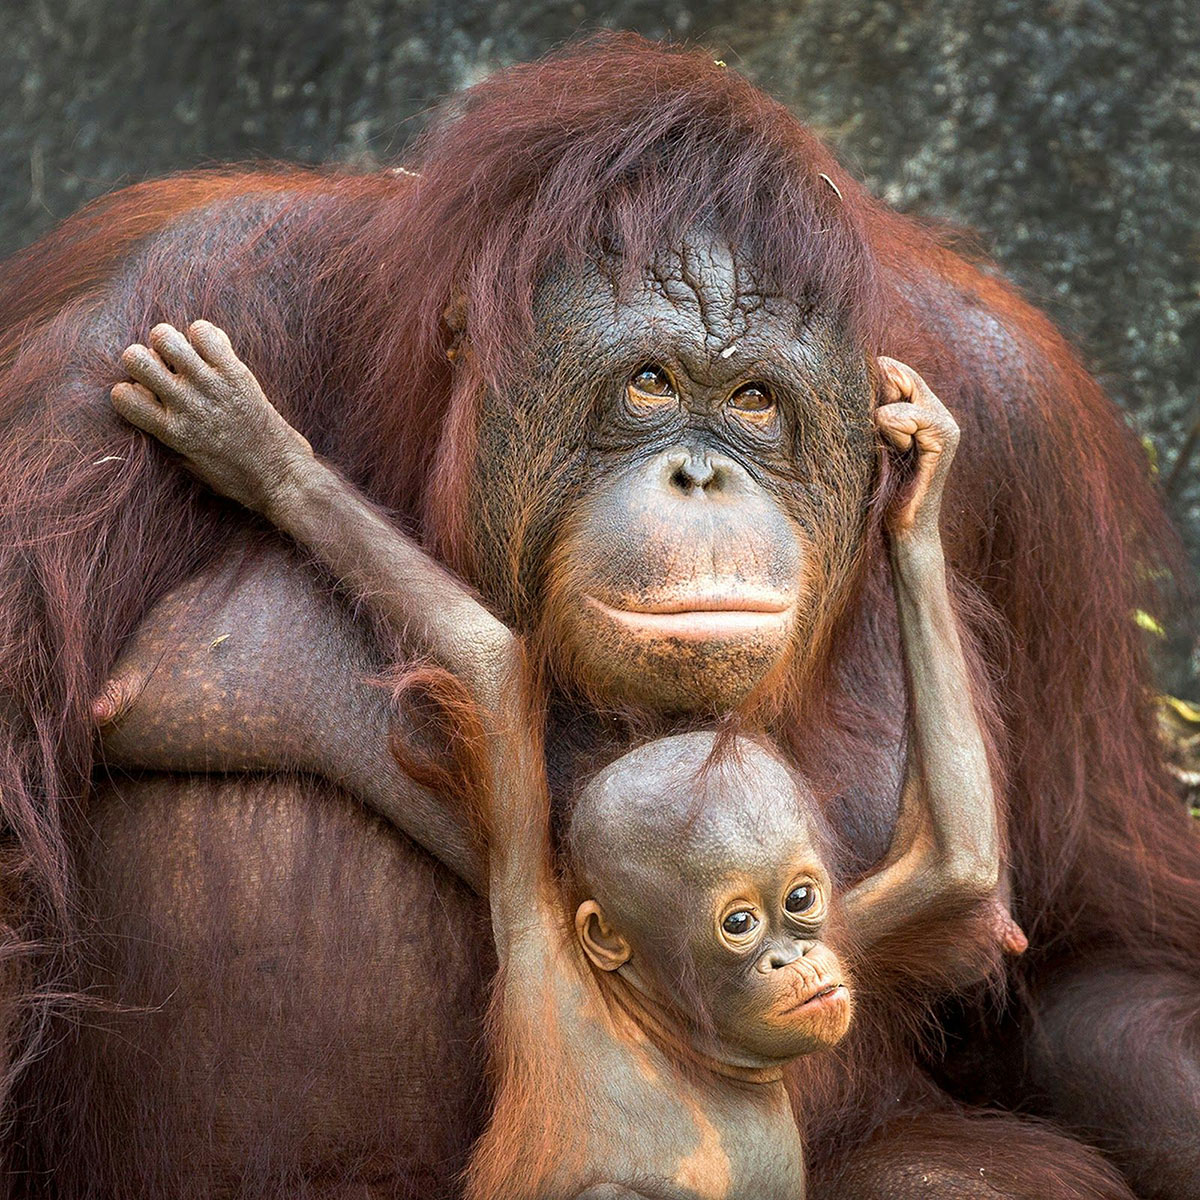 Orangutan habitat will not be destroyed by the palm oil ...